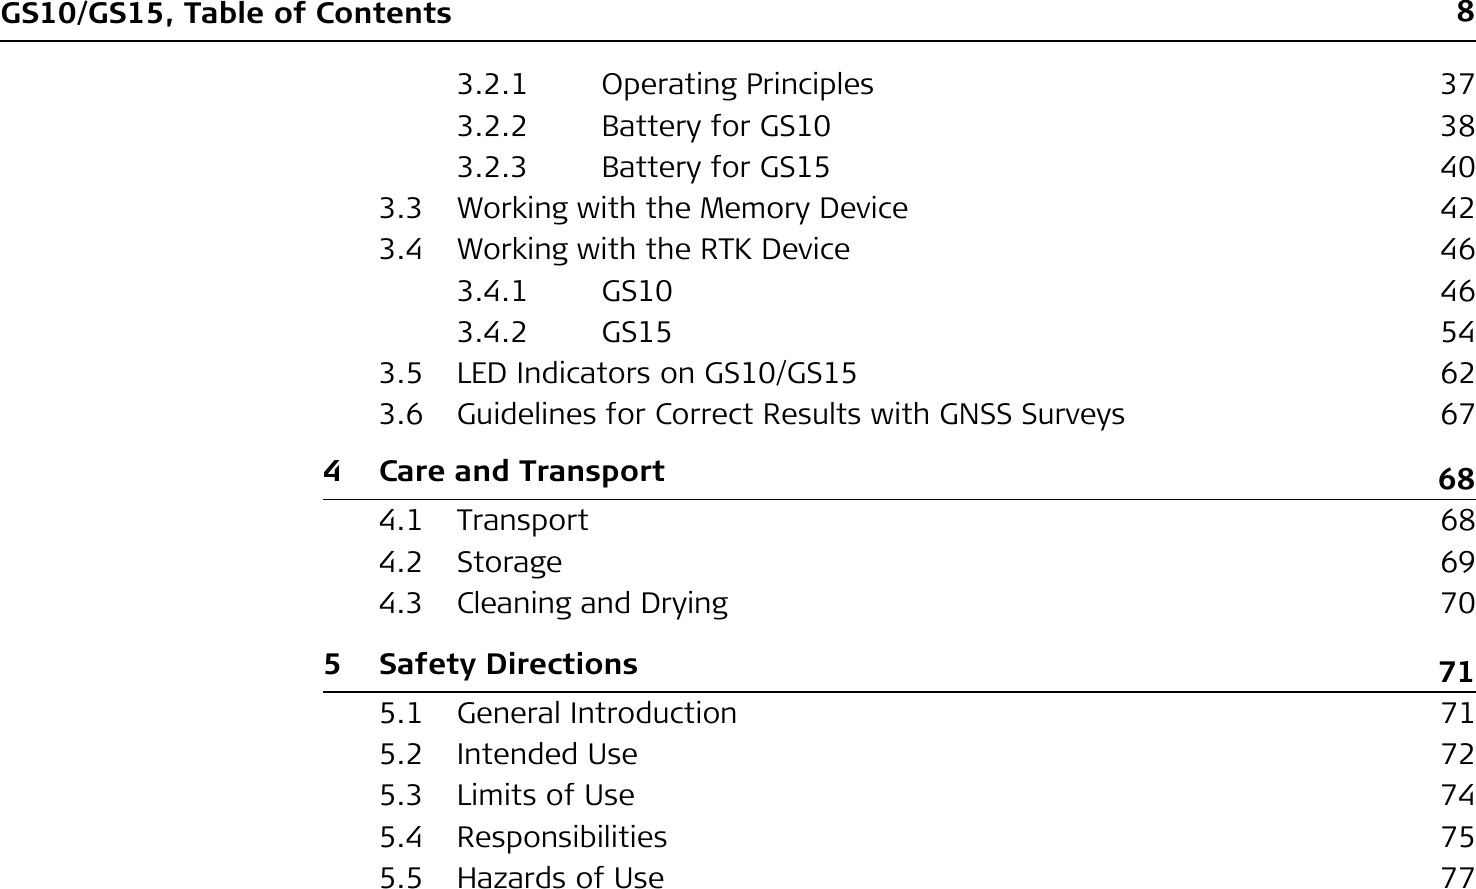 8GS10/GS15, Table of Contents3.2.1 Operating Principles 373.2.2 Battery for GS10  383.2.3 Battery for GS15  403.3 Working with the Memory Device 423.4 Working with the RTK Device 463.4.1 GS10 463.4.2 GS15 543.5 LED Indicators on GS10/GS15  623.6 Guidelines for Correct Results with GNSS Surveys 674 Care and Transport 684.1 Transport 684.2 Storage 694.3 Cleaning and Drying 705 Safety Directions 715.1 General Introduction 715.2 Intended Use 725.3 Limits of Use 745.4 Responsibilities 755.5 Hazards of Use 77